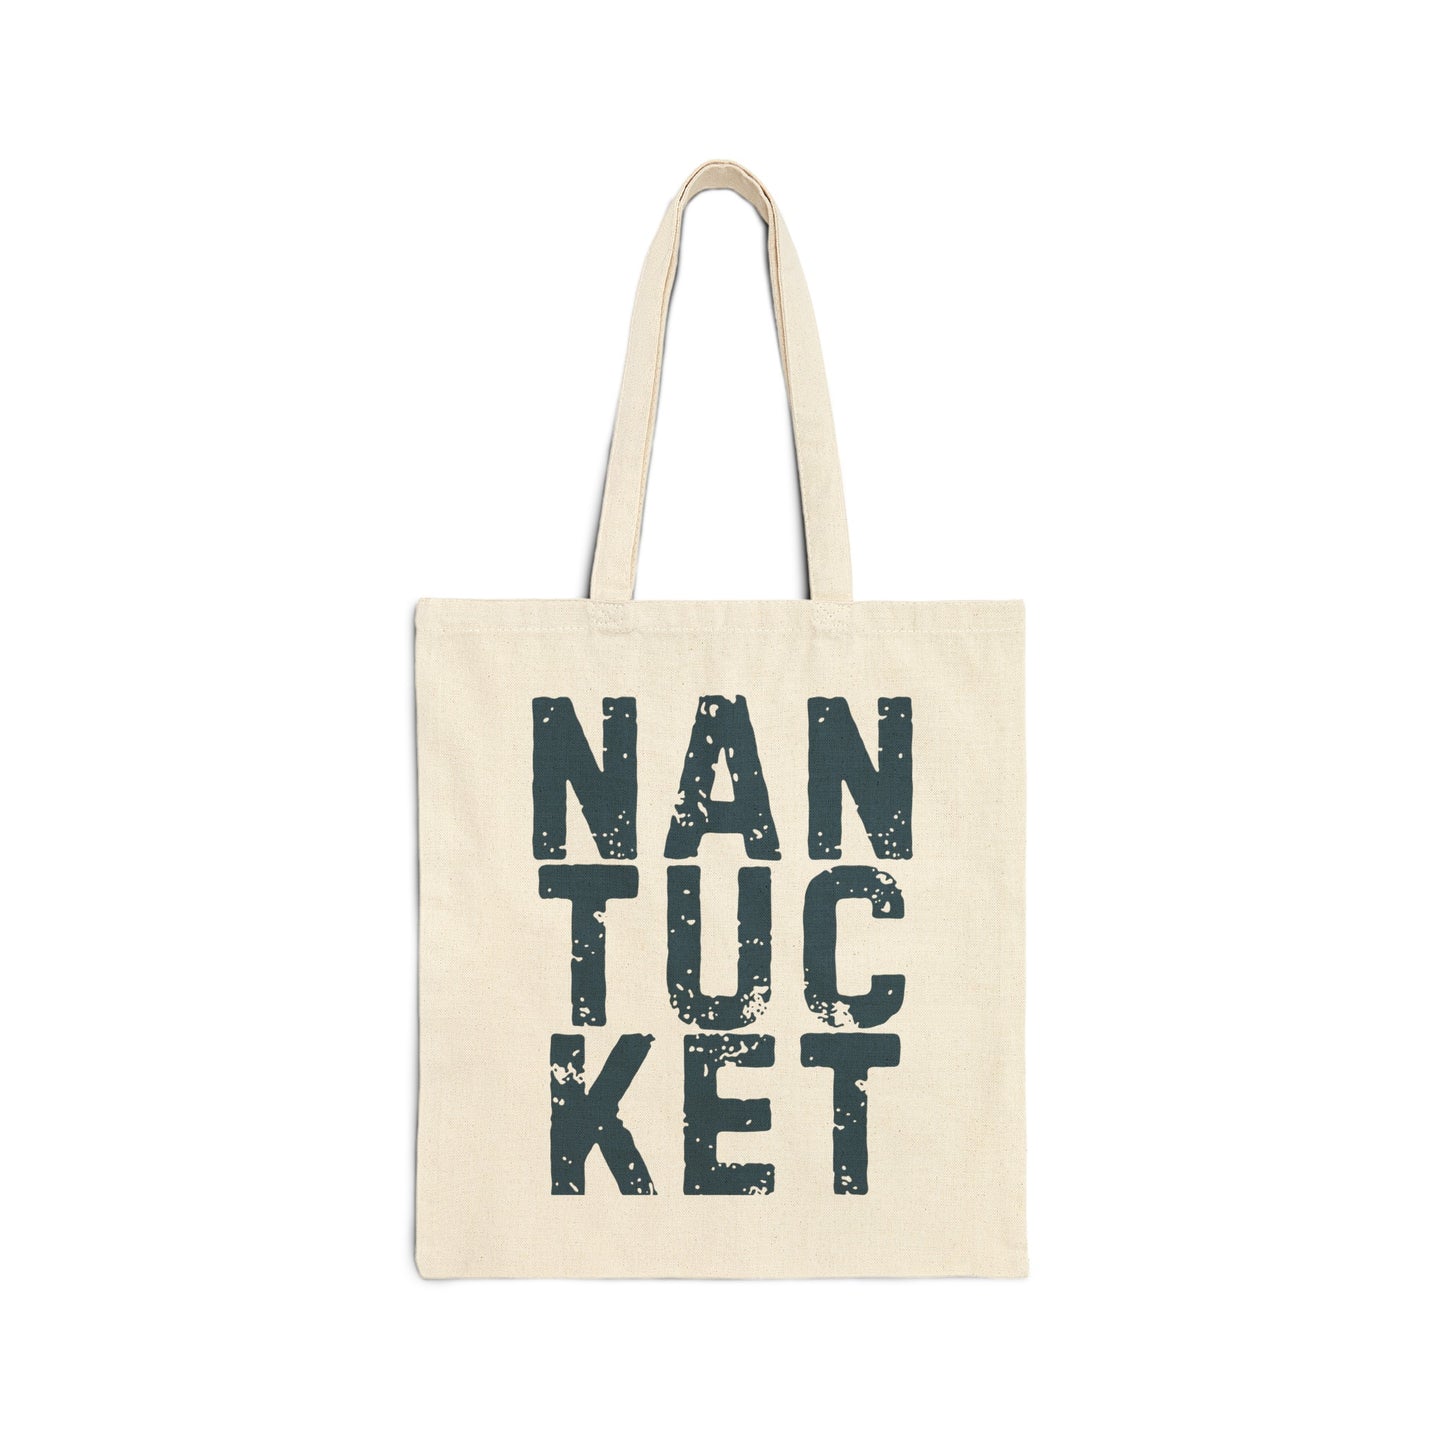 Nantucket Cotton Canvas Tote Bag - Perfect for Beach, Shopping, and Everyday Use